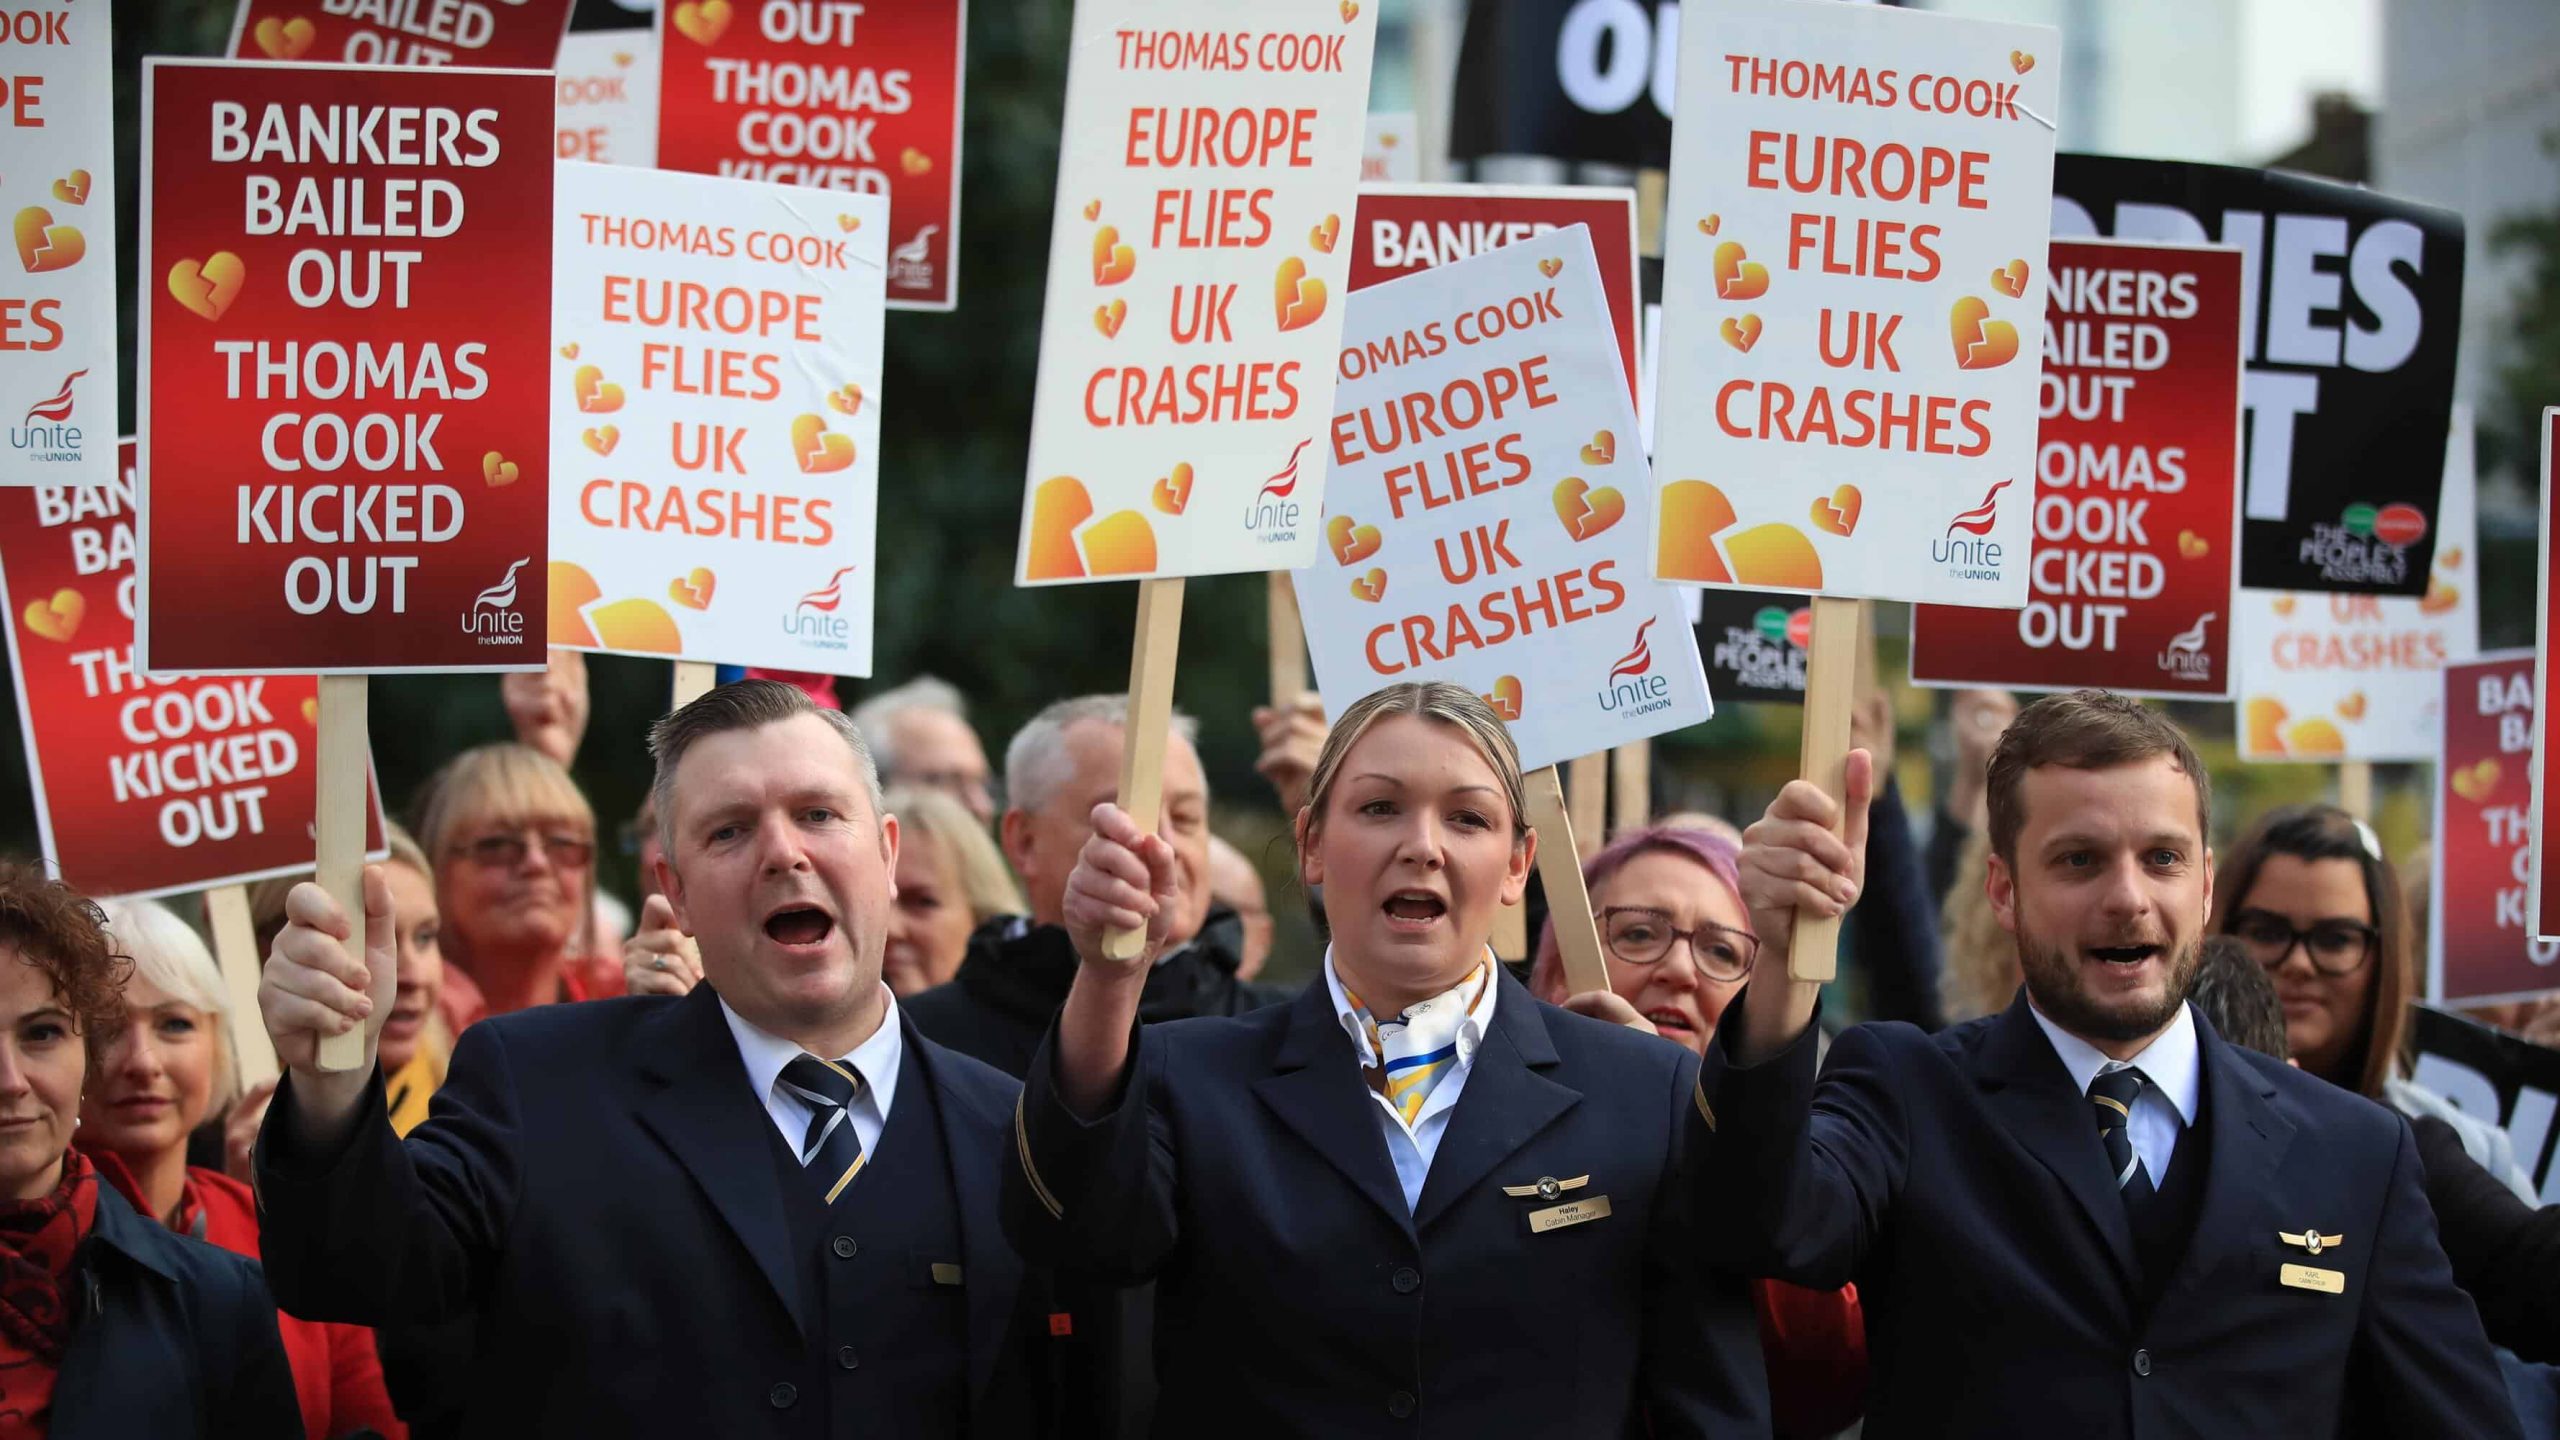 Thomas Cook staff protest outside the Conservative Party conference